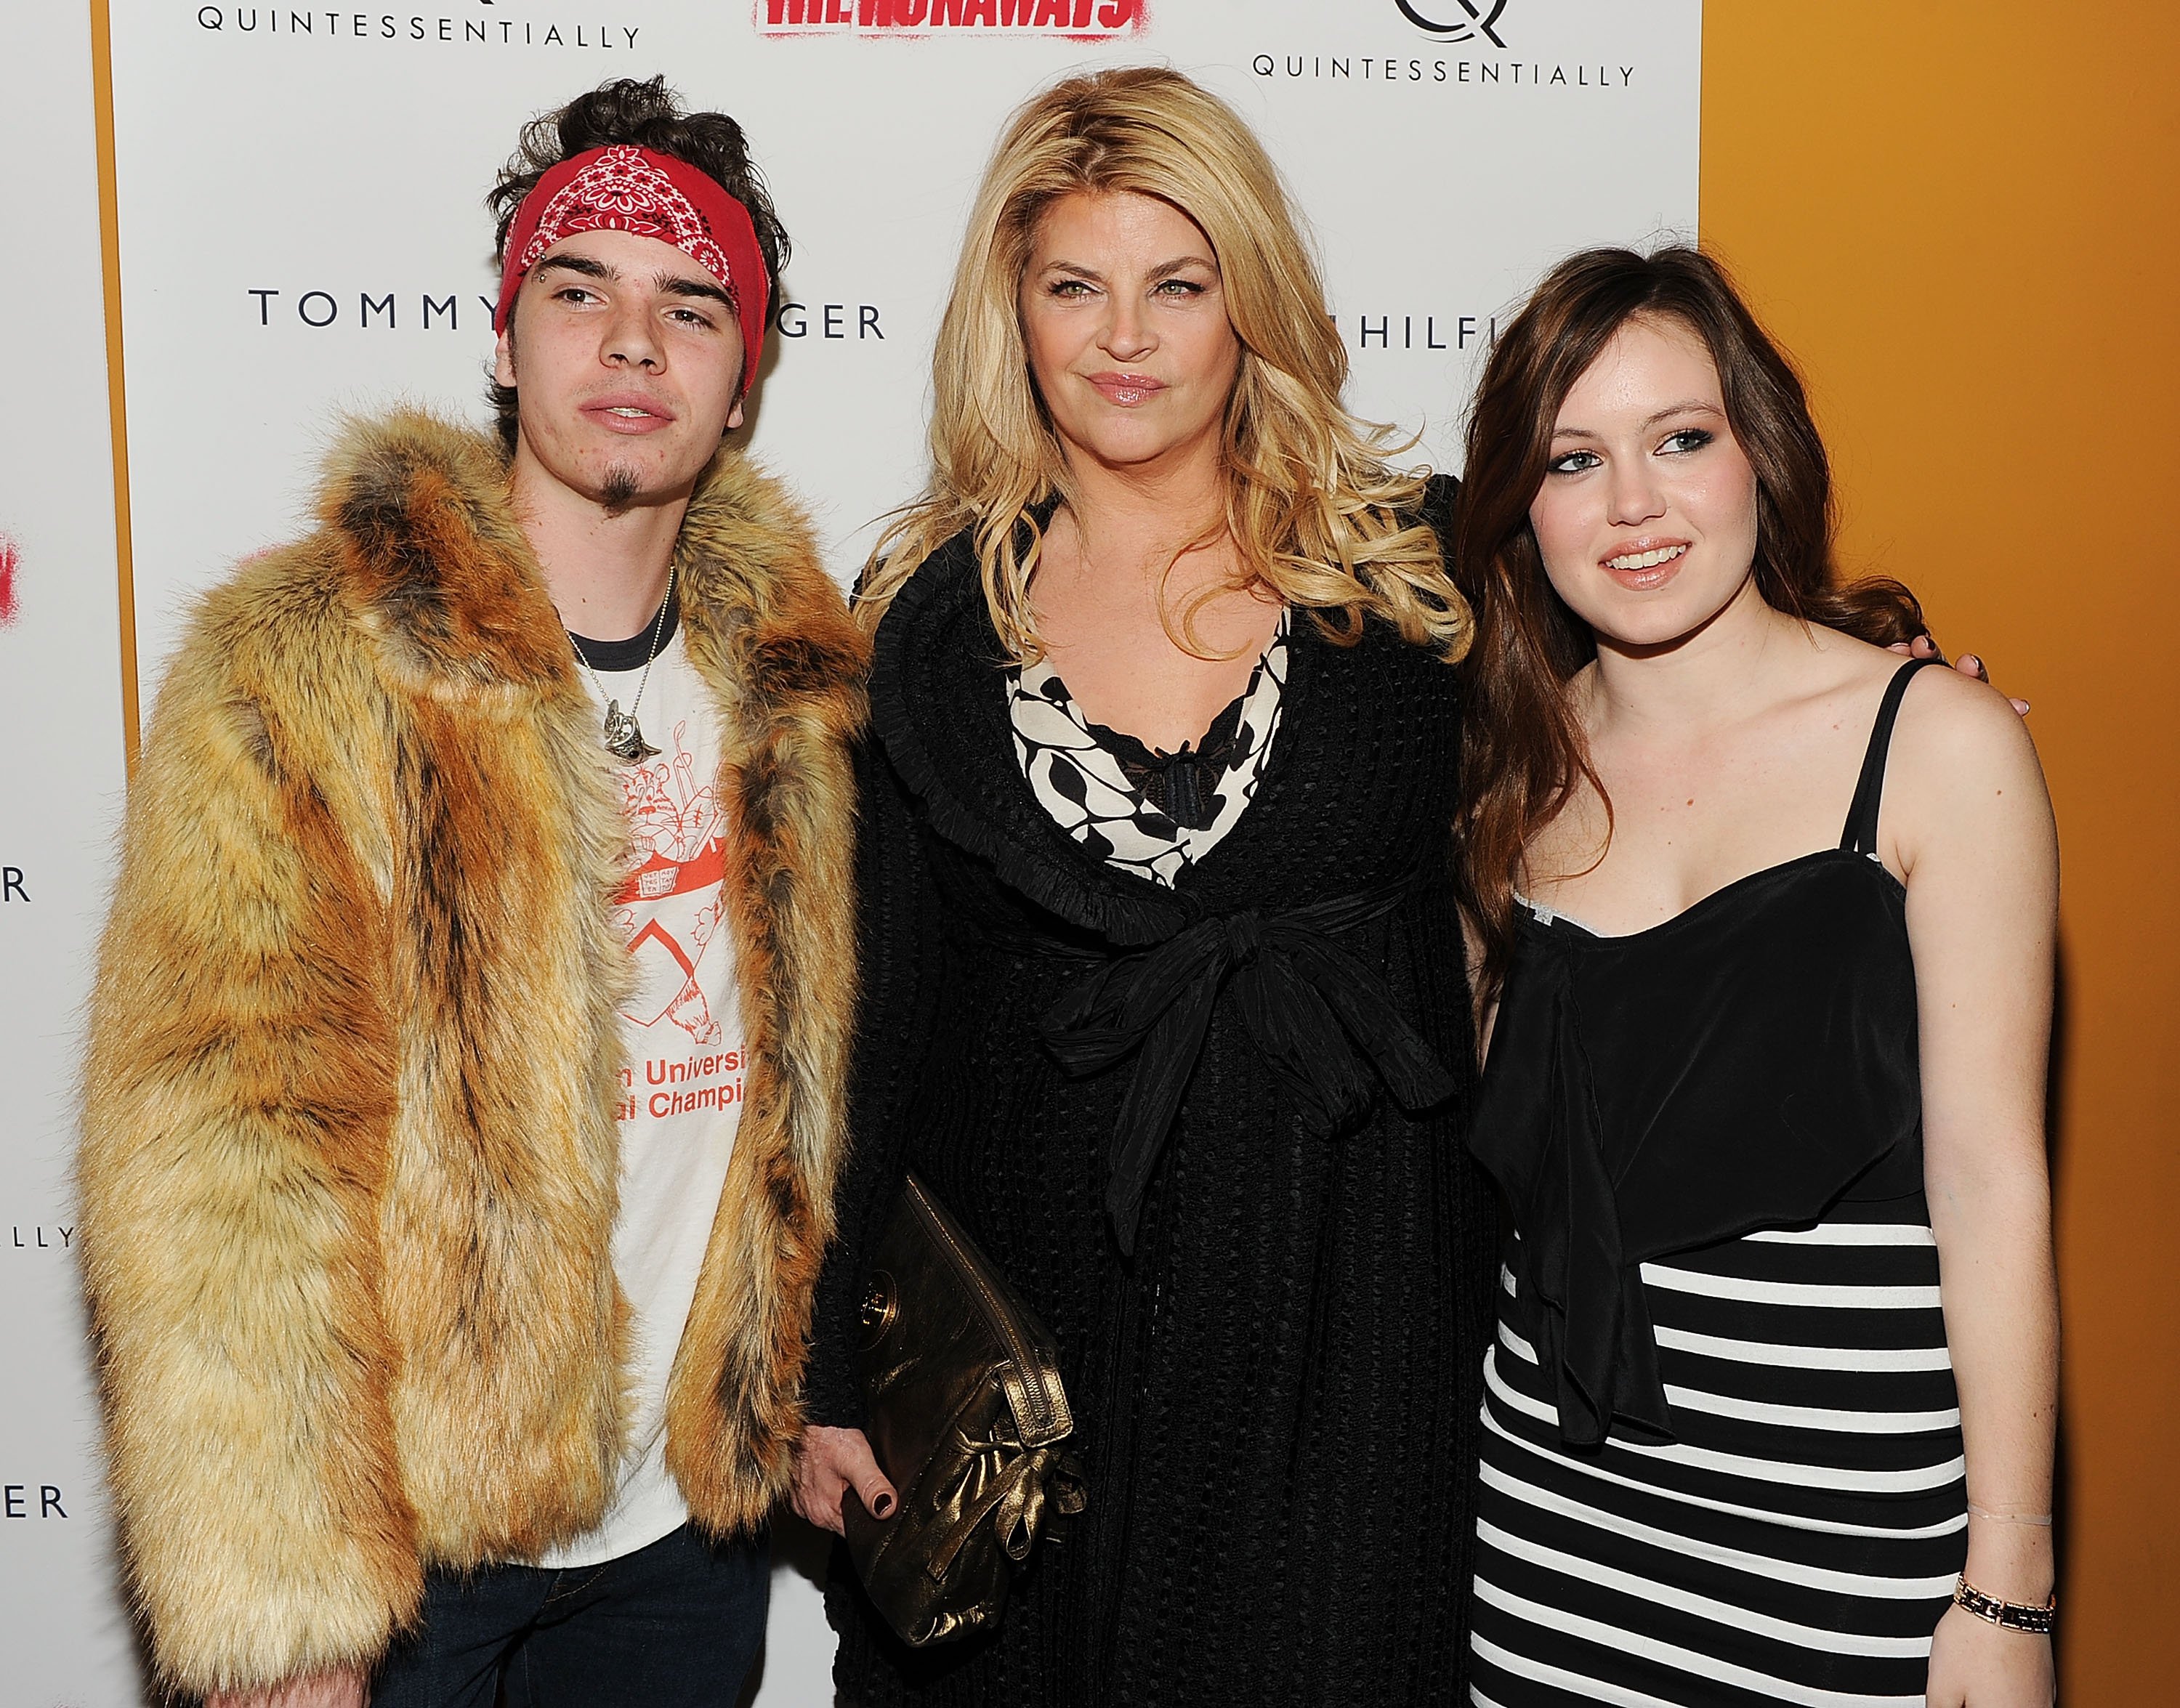 Kirstie Alley with children William True and Lillie Price at the "The Runaways" New York premiere on March 17, 2010, in New York City. | Source: Getty Images.